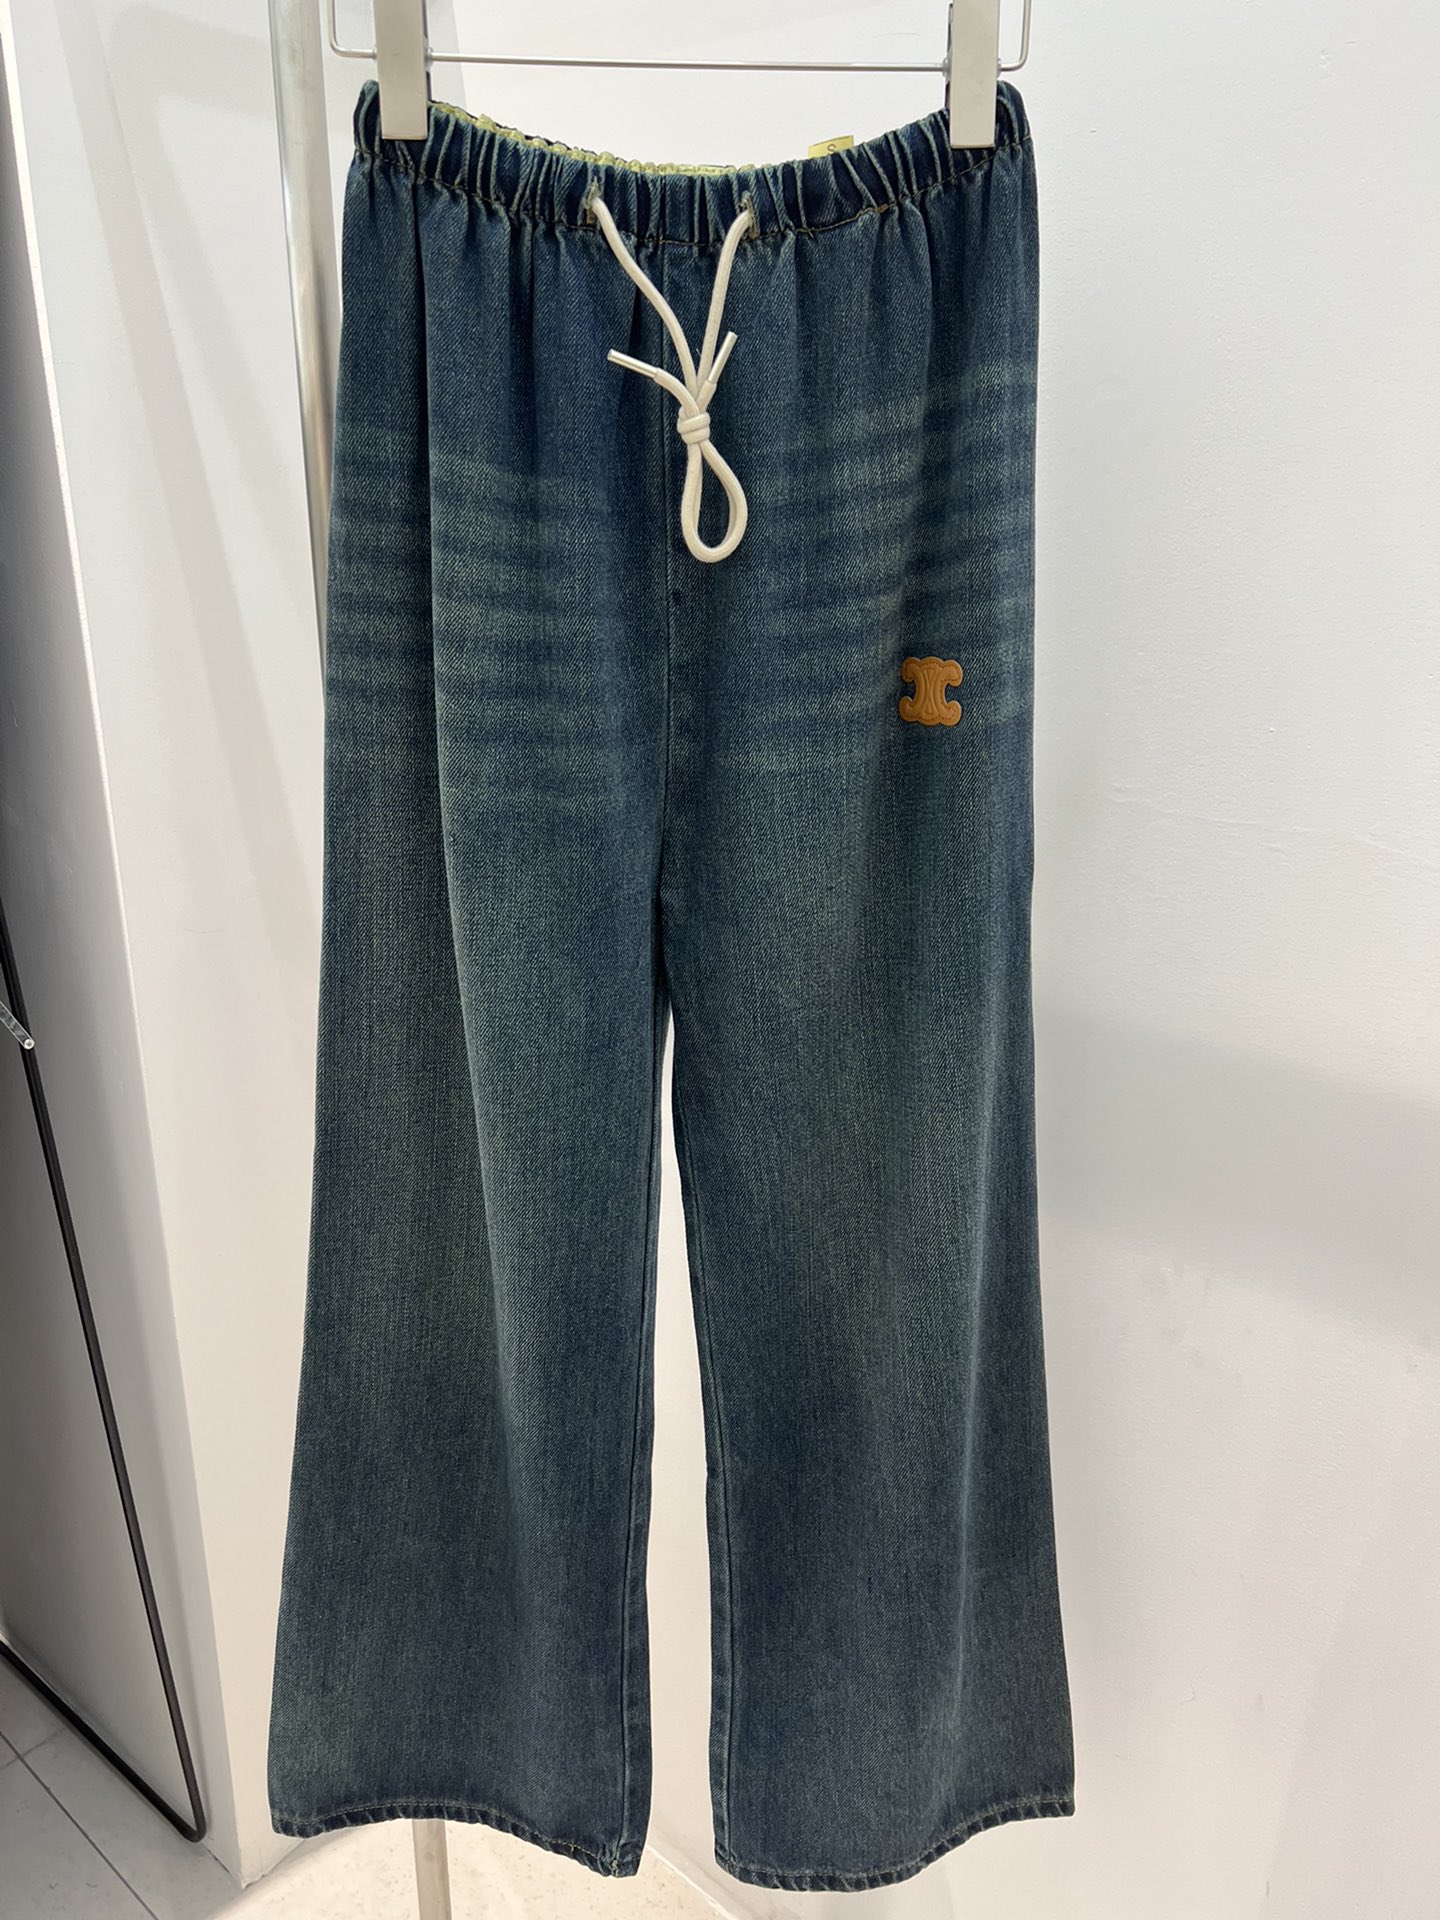 Celine Clothing Pants & Trousers Fall/Winter Collection Vintage Wide Leg